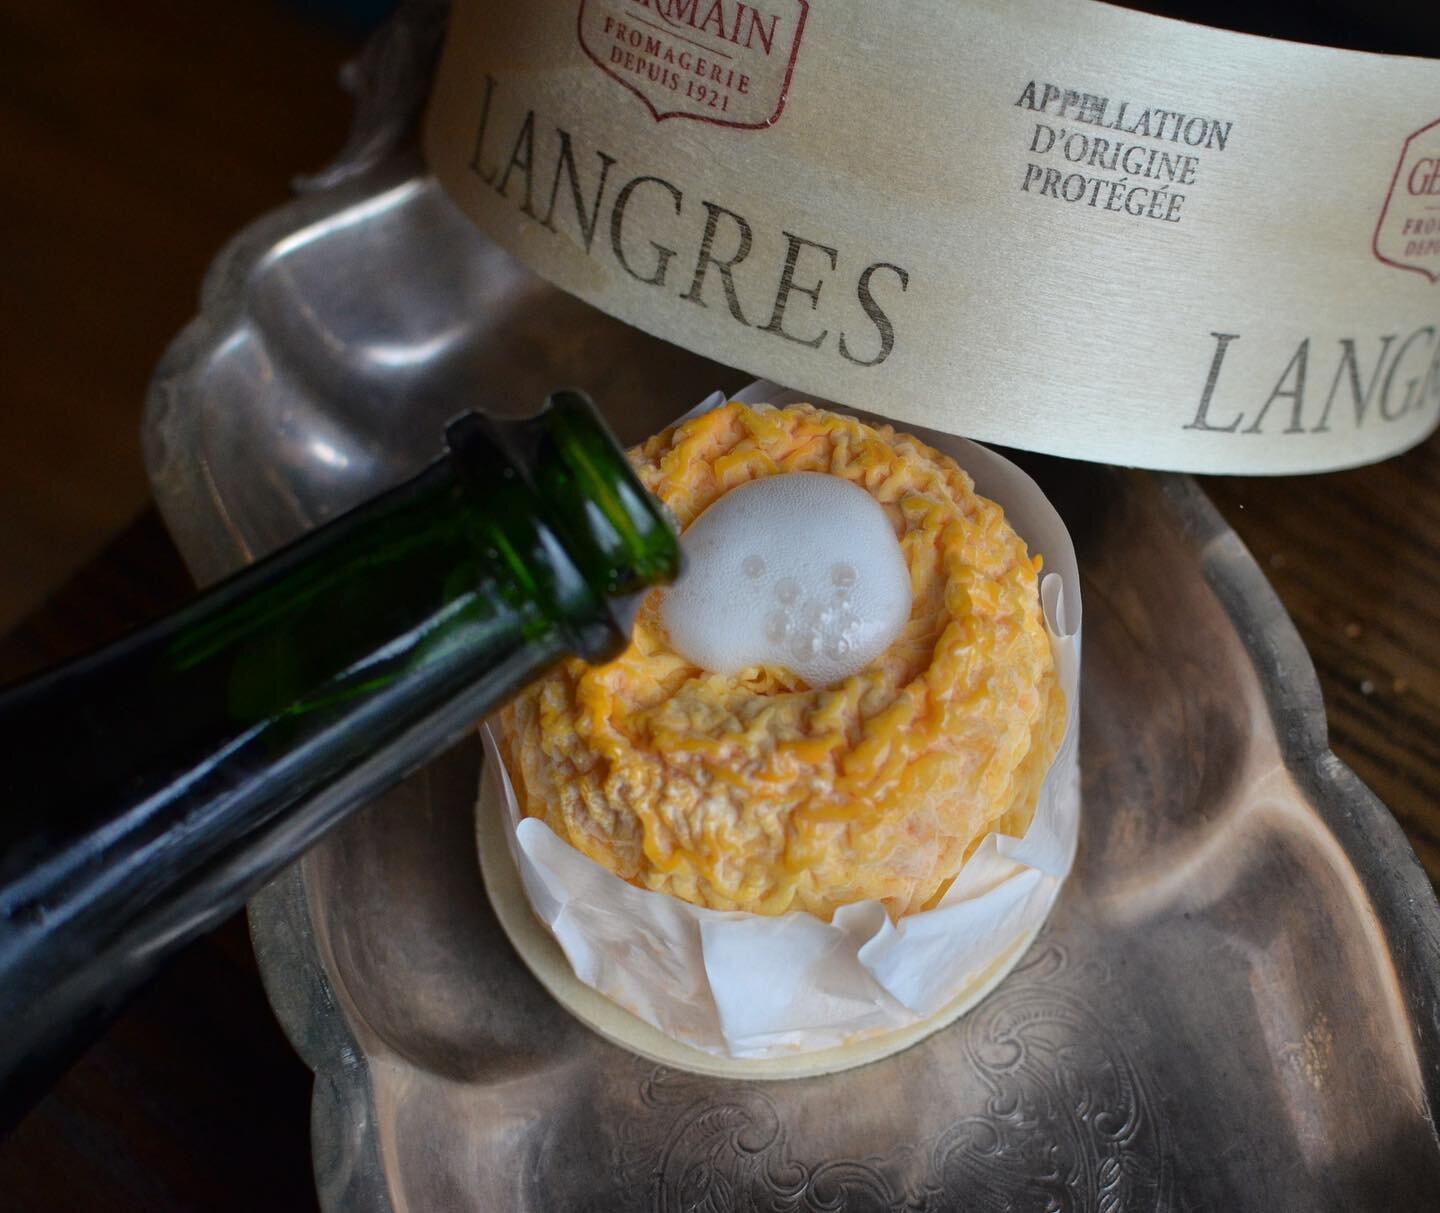 Langres is back in stock and tis the season! This would be an awesome add on for a Mom&rsquo;s Day celebration or just celebrating that spring is here. Remember to pickup a bottle of bubbles when you&rsquo;re in shop so you can top off this delicious